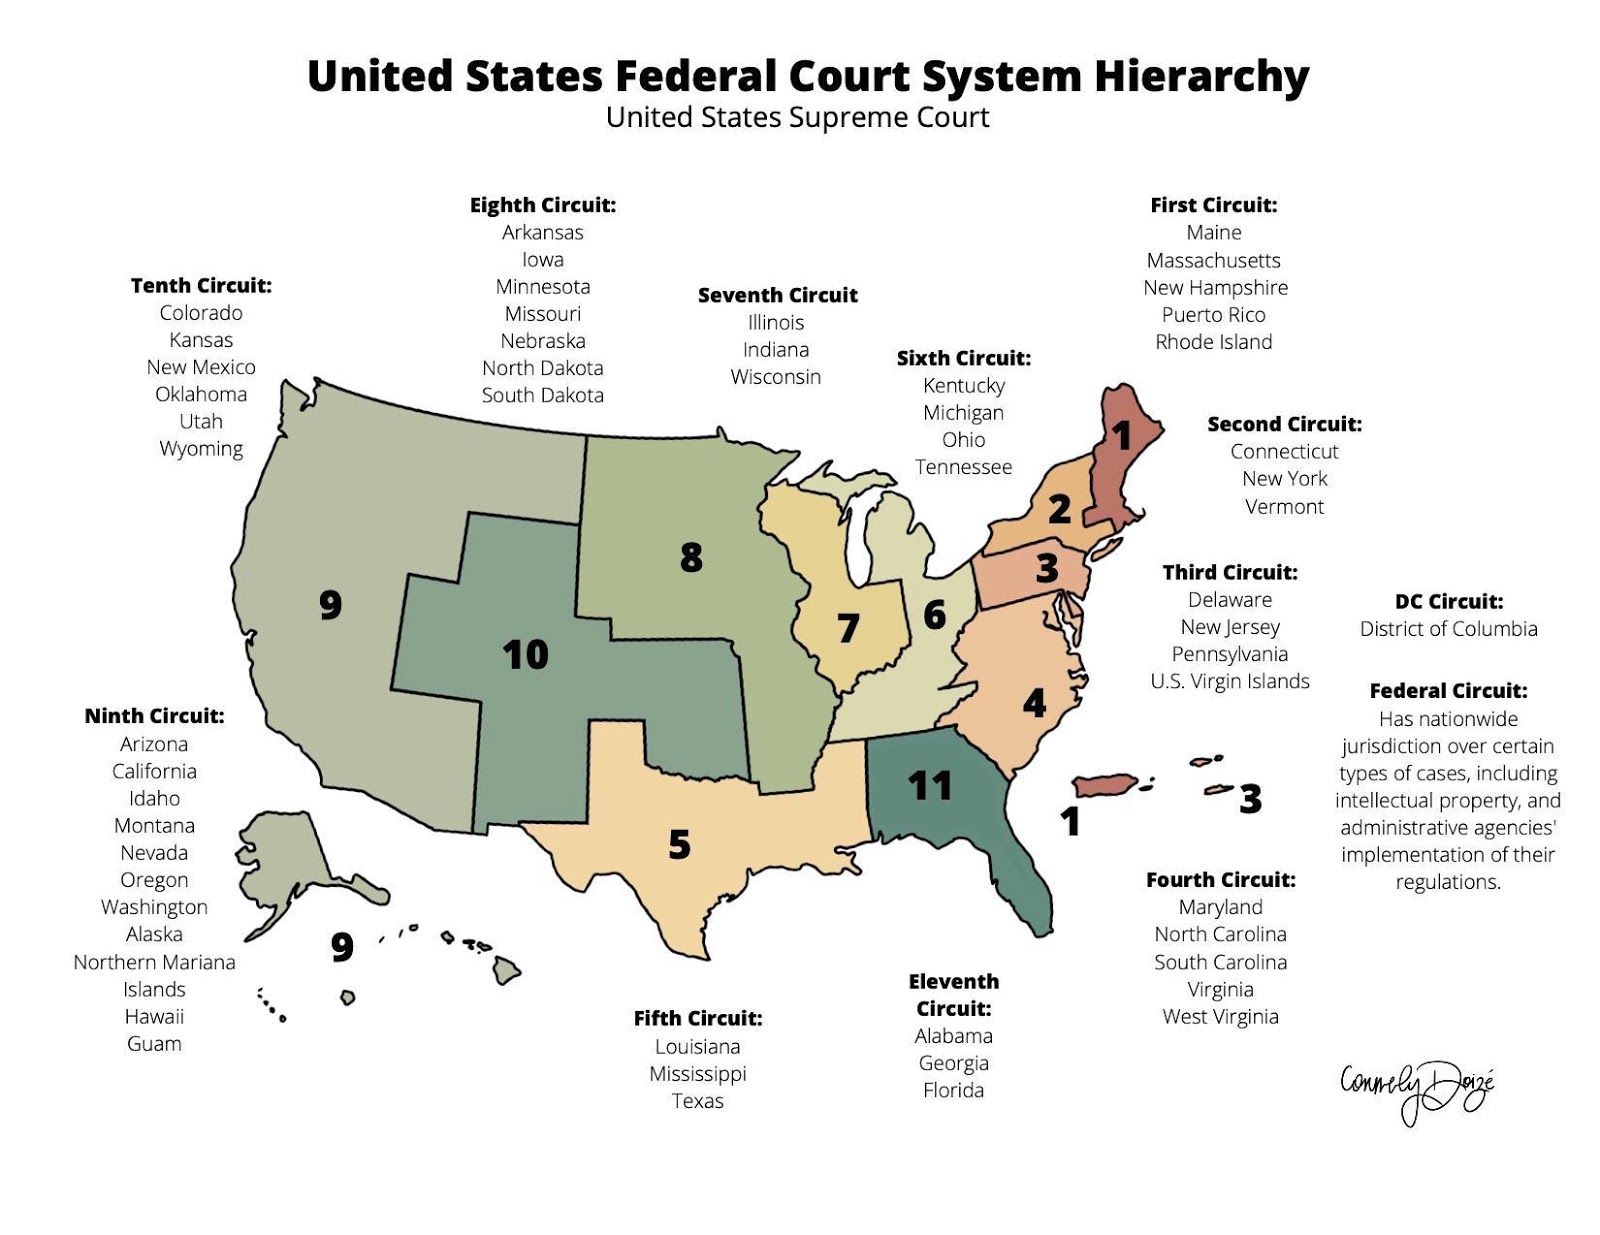 Diagram of a map of federal corut system hiearchy. Description to follow.